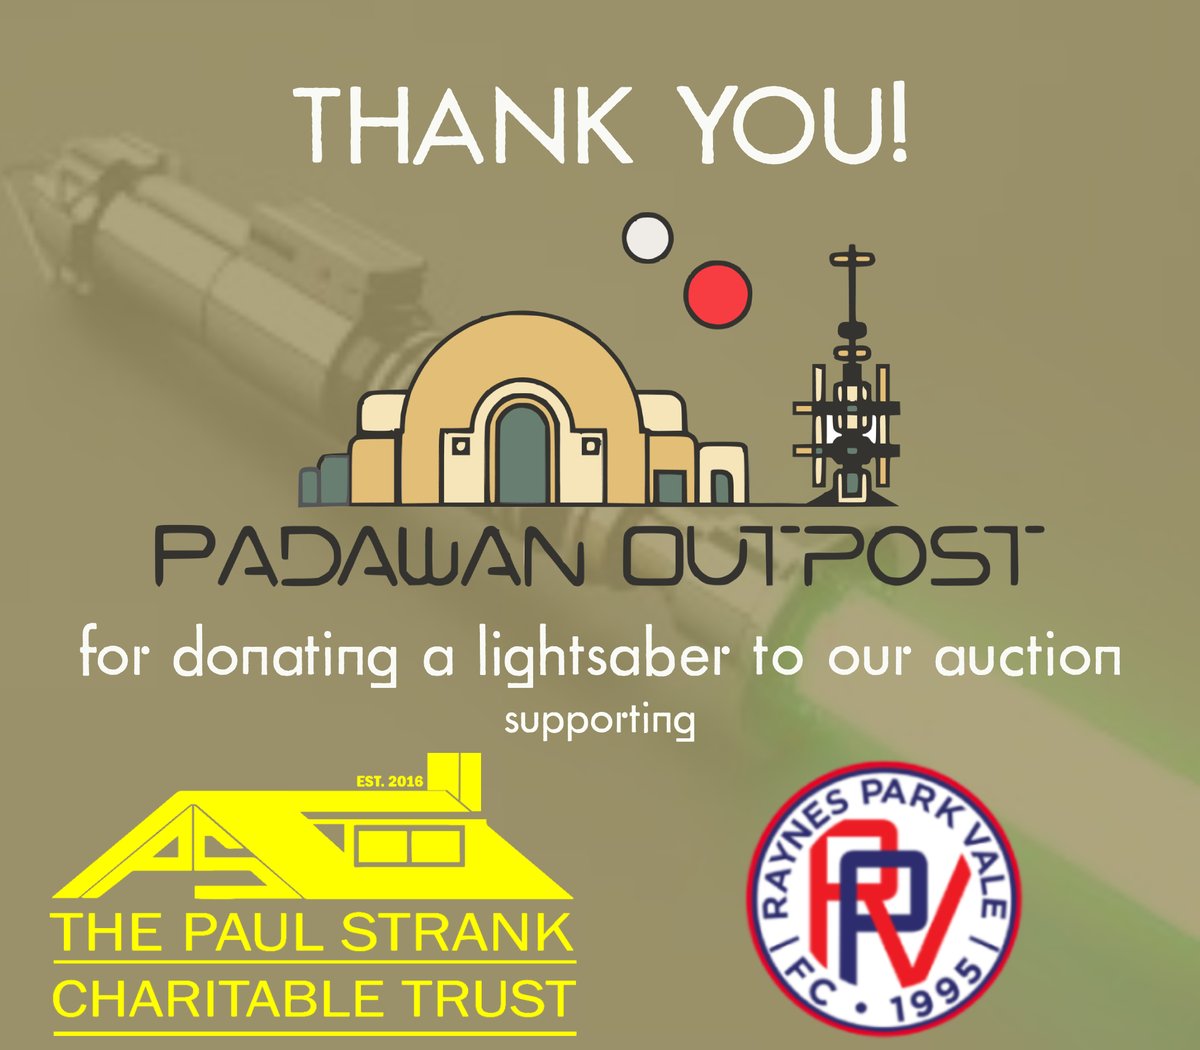 A huge thank you to @padawanoutpost for donating a custom lightsaber towards our auction for this Saturday's event at The Light House!